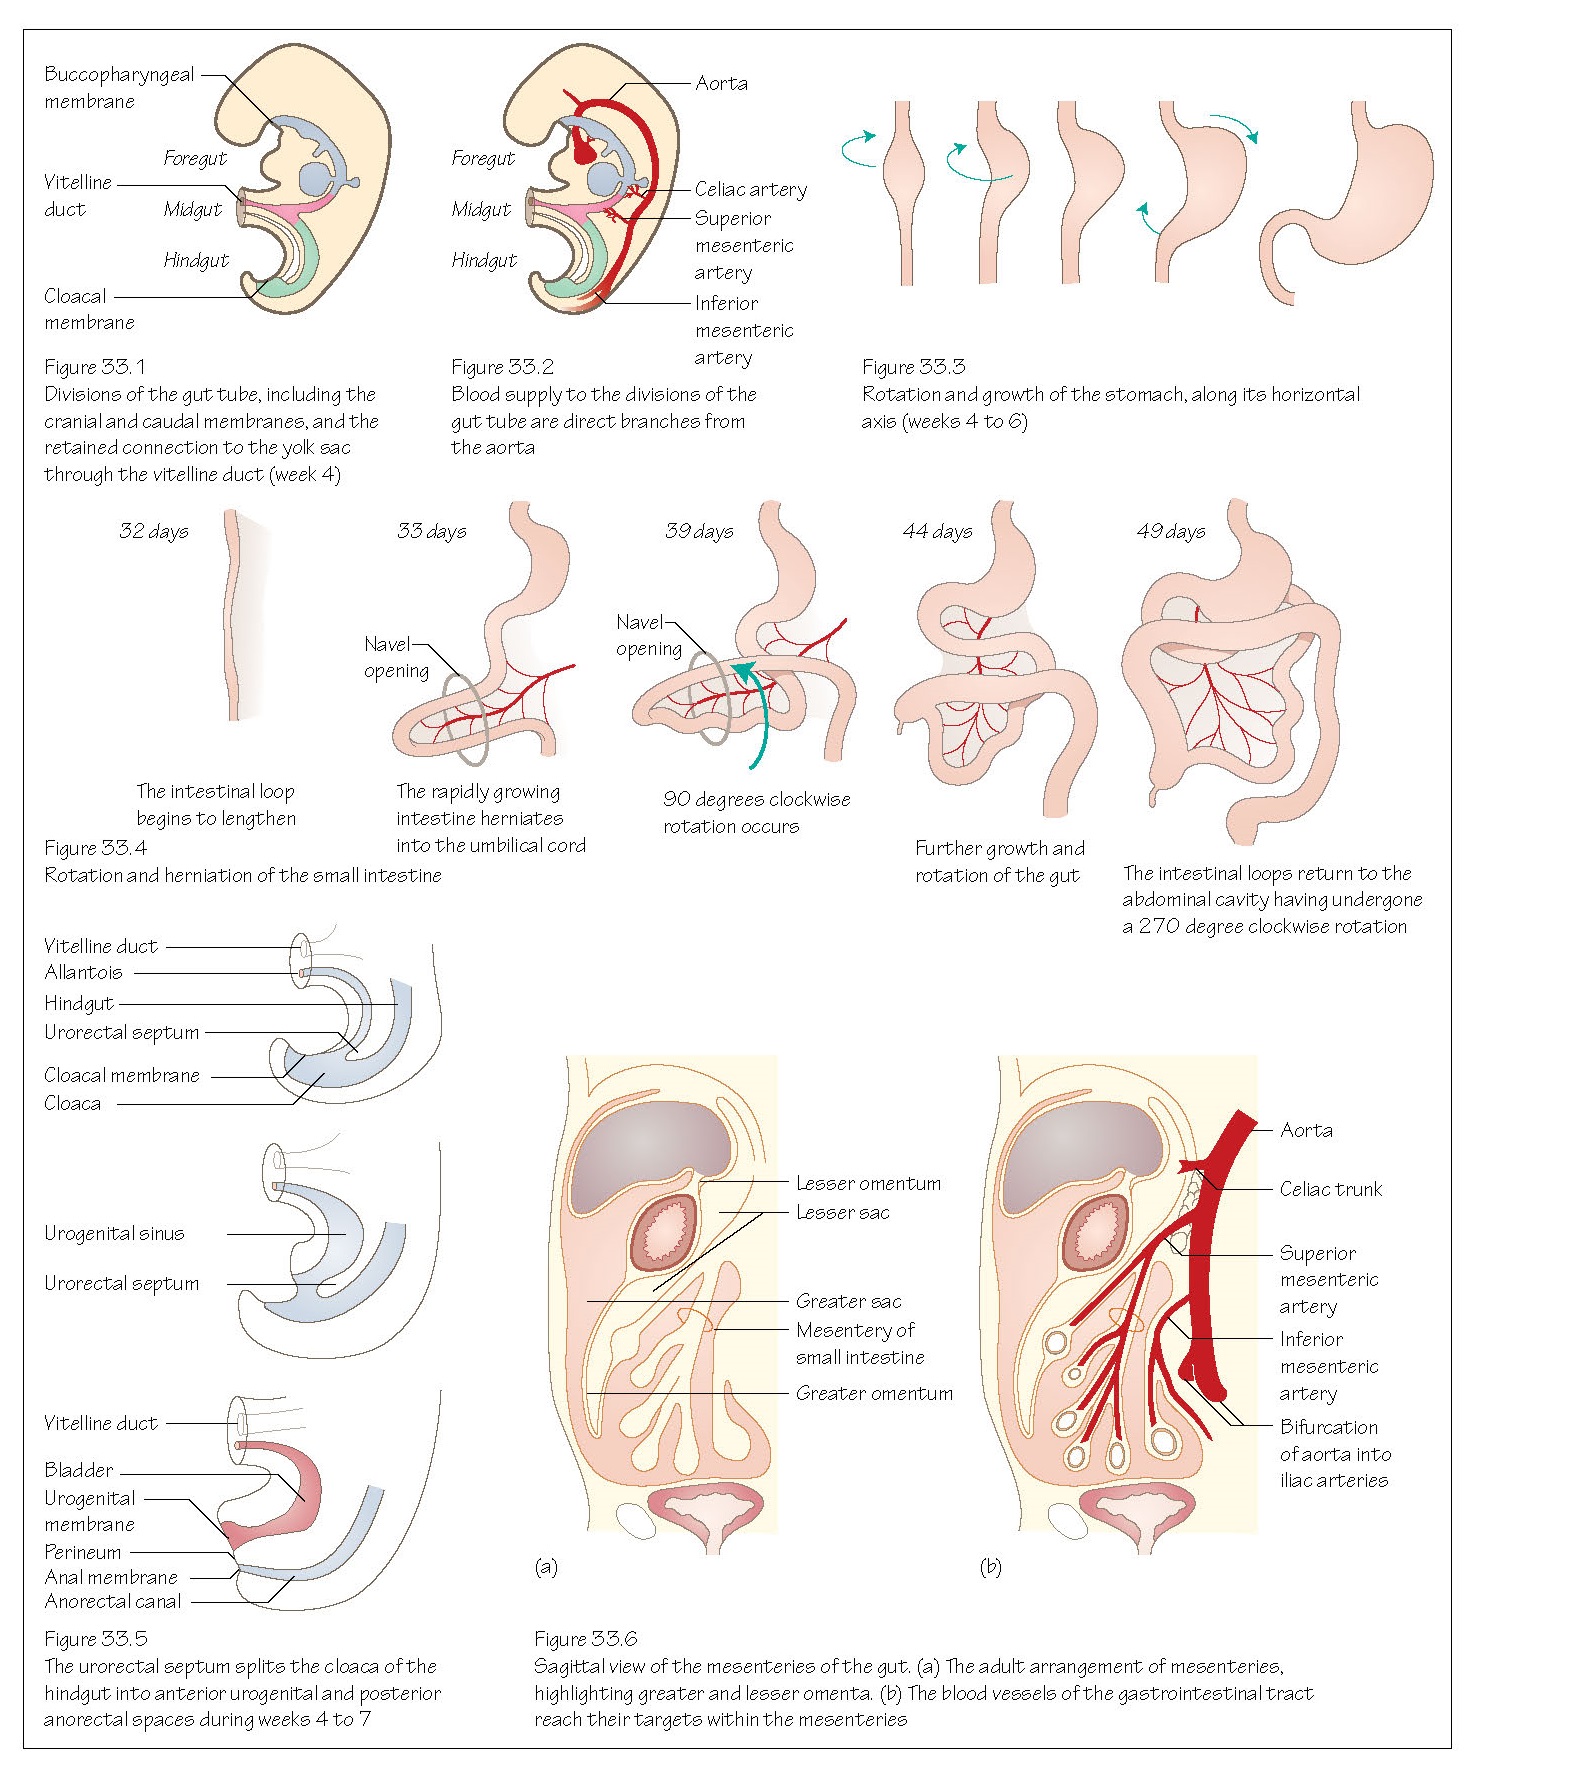 Digestive System: Gastrointestinal Tract, Mesenteries, Story of the hindgut and the cloaca, Twists of the midgut